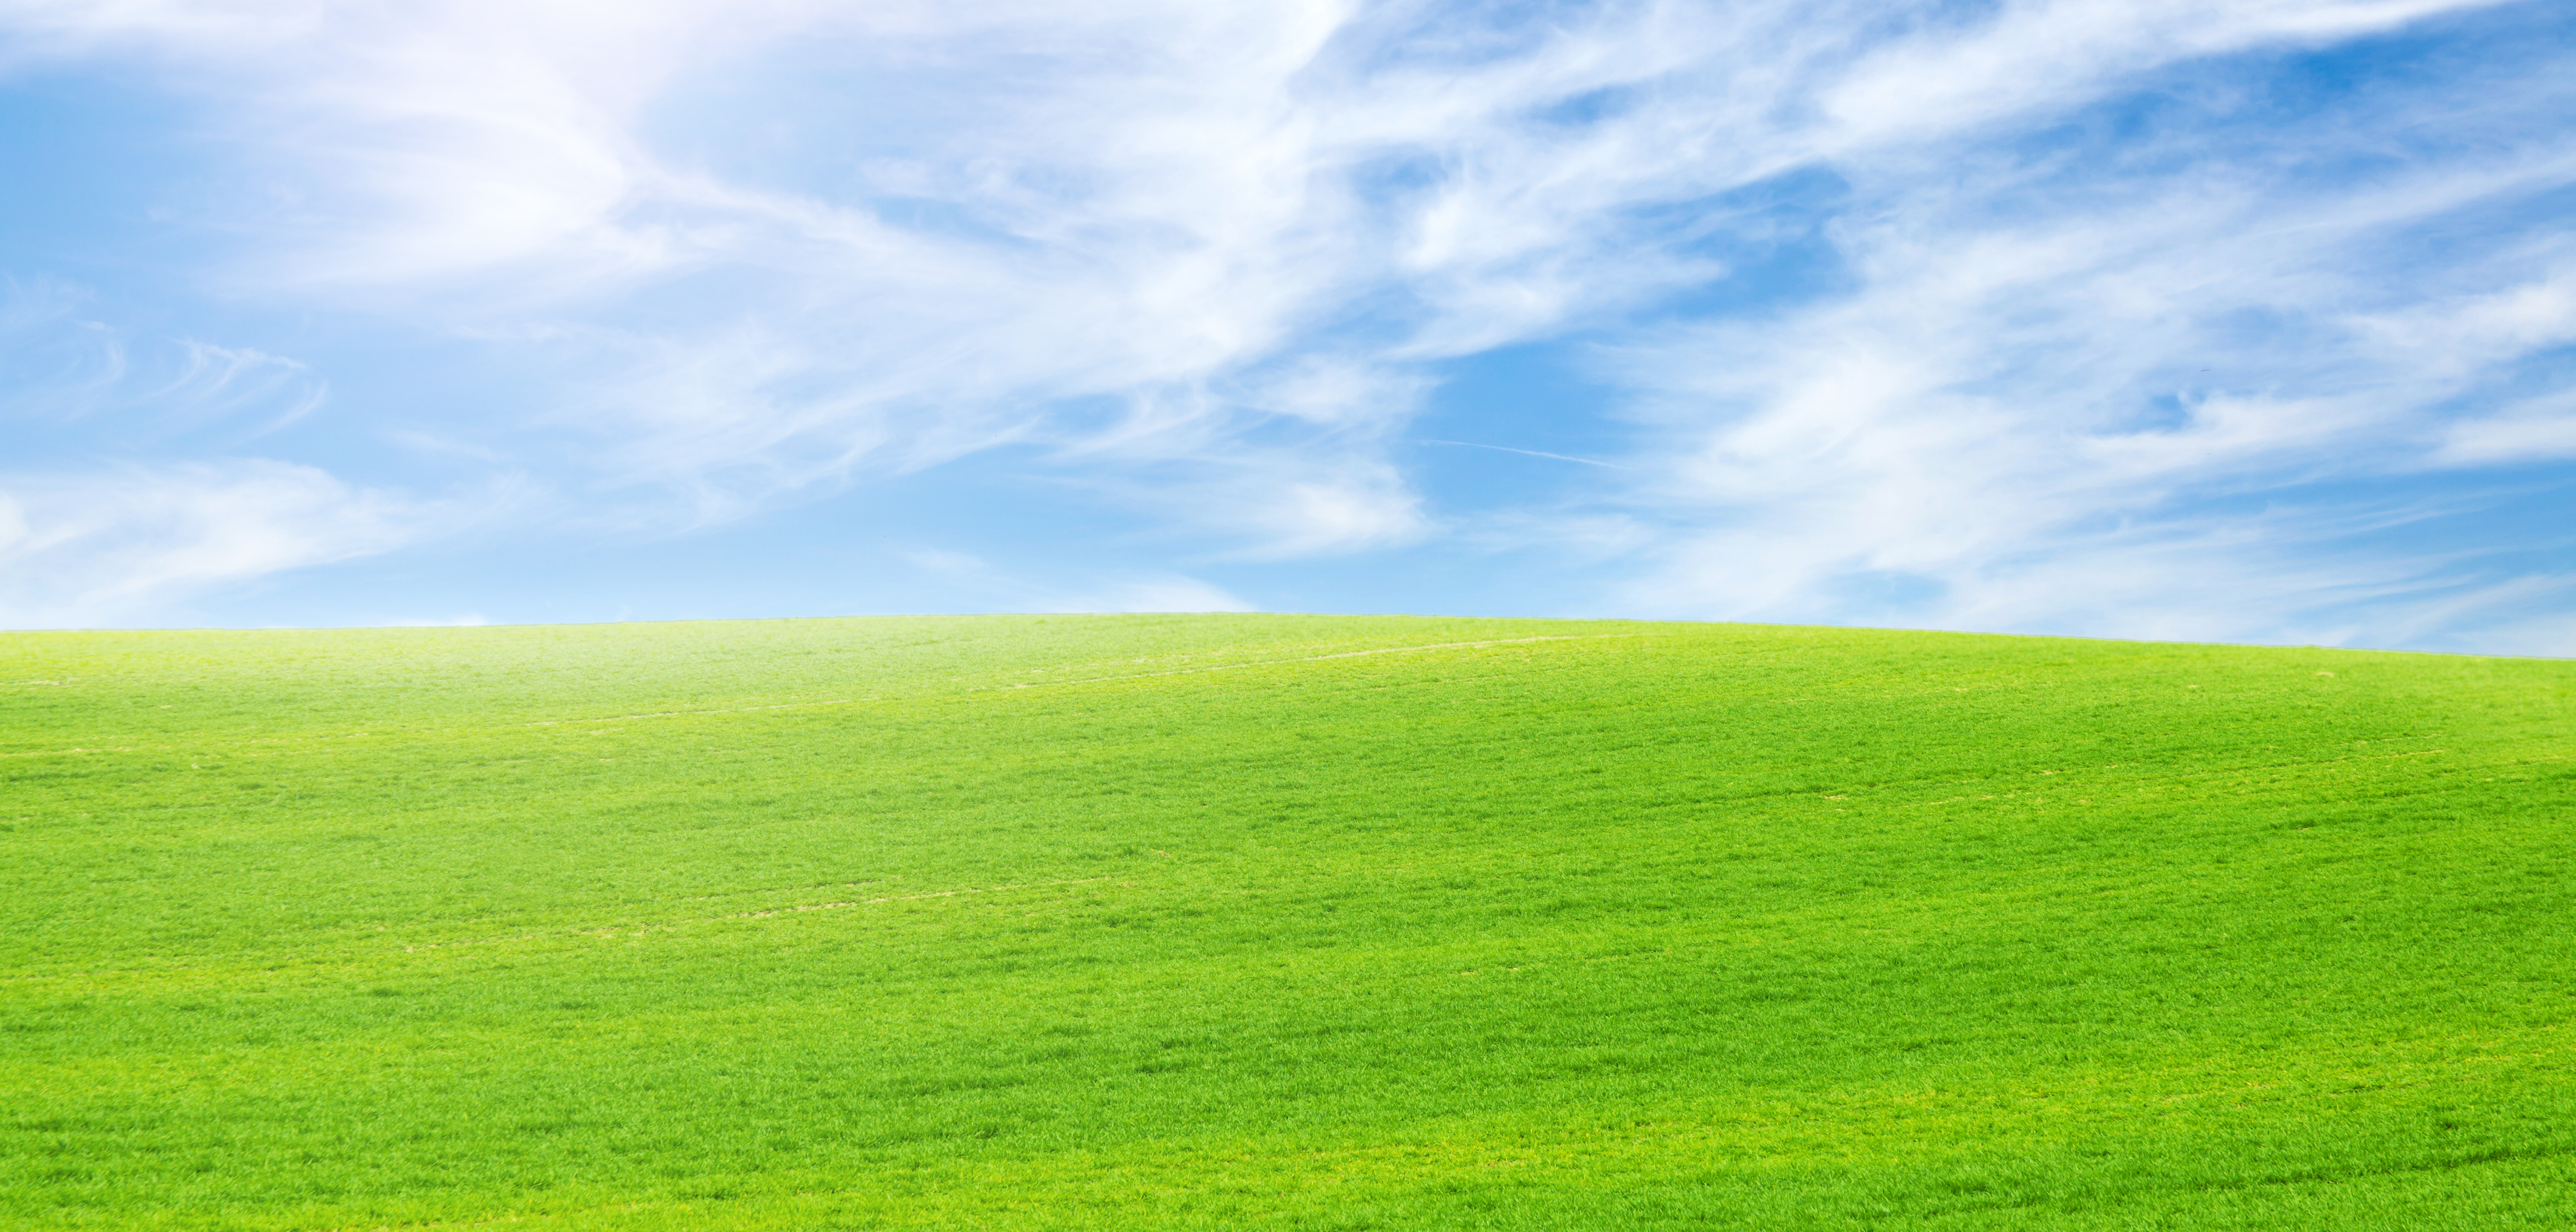 Grass And Sky Backgrounds